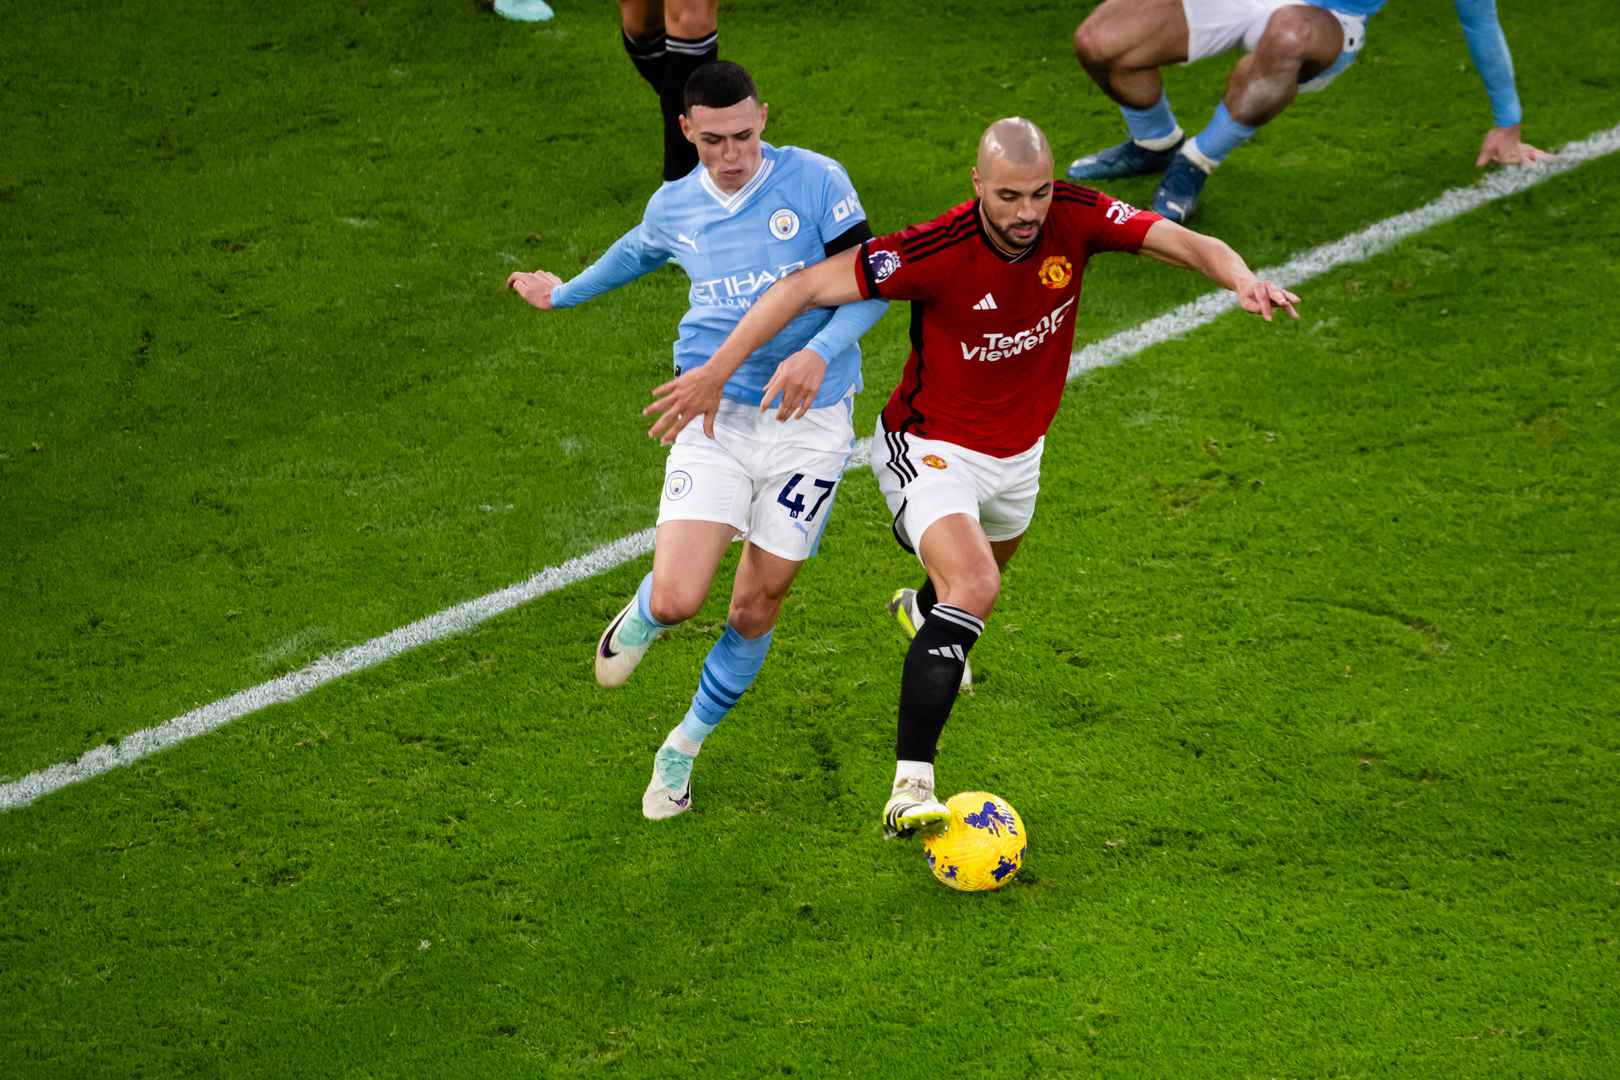 Manchester United 0 x 0 Manchester City